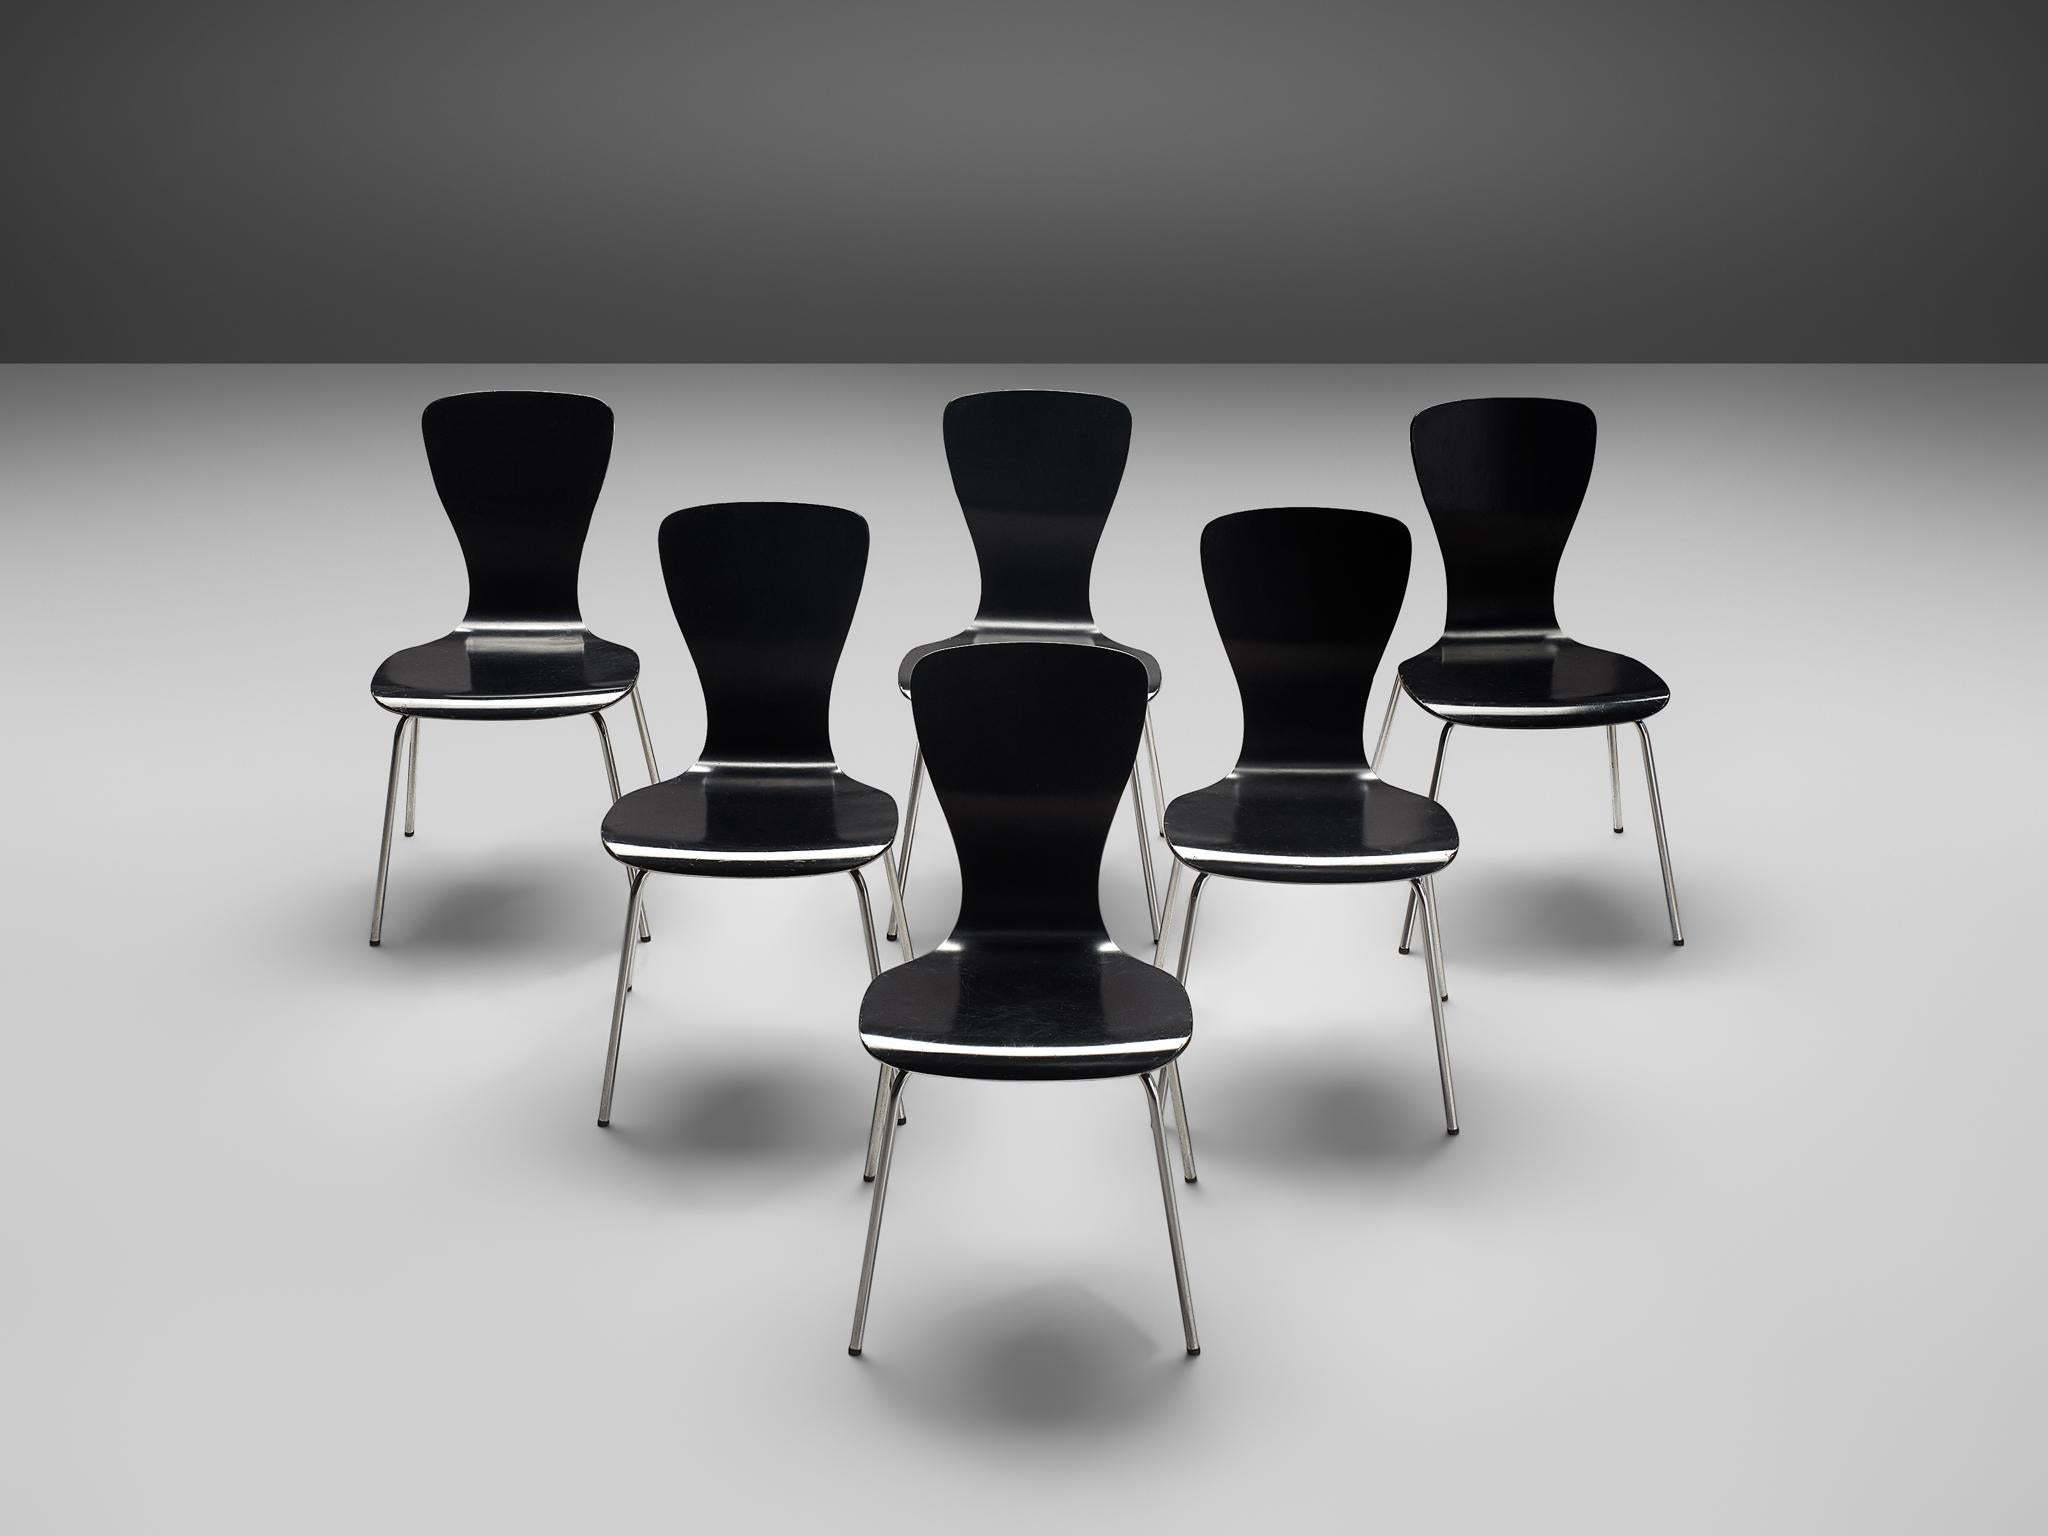 Tapio Wirkkala for Asko, set of dining chairs, black lacquered plywood and metal, Finland, 1950s

Beautiful and large set of 'Nikke' chairs design by the Finnish designer Tapio Wirkkala. This model is a wonderful example of an early minimalist